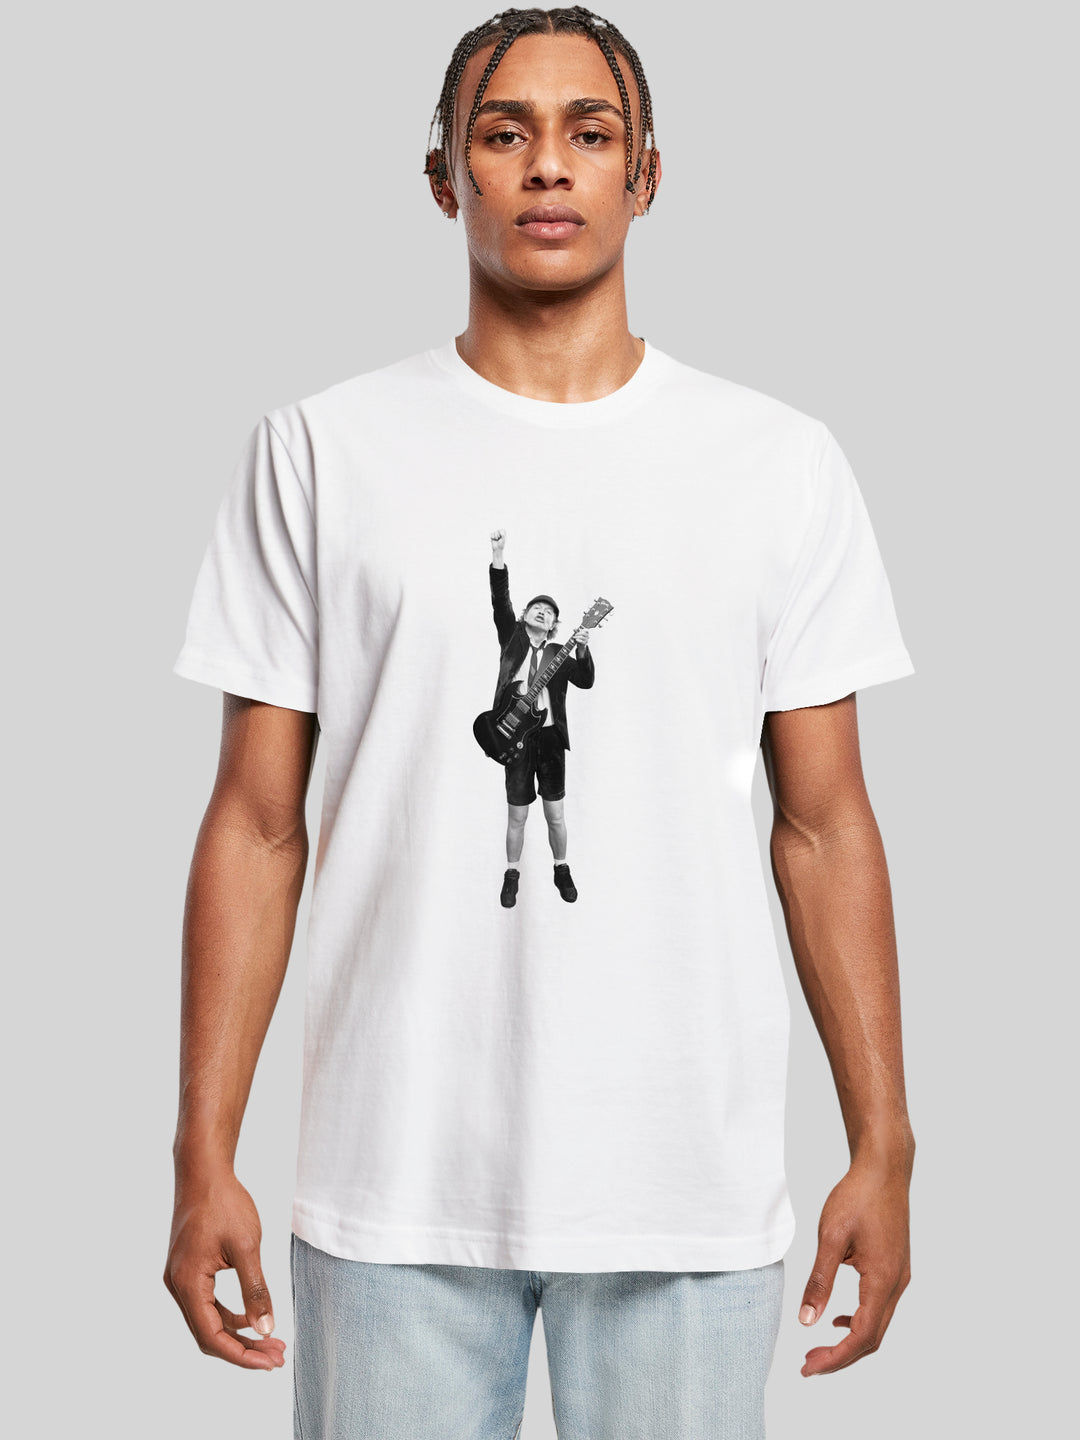 AC/DC Angus Young Cut Out Round Neck T-Shirt - The Ultimate Fan Tribute